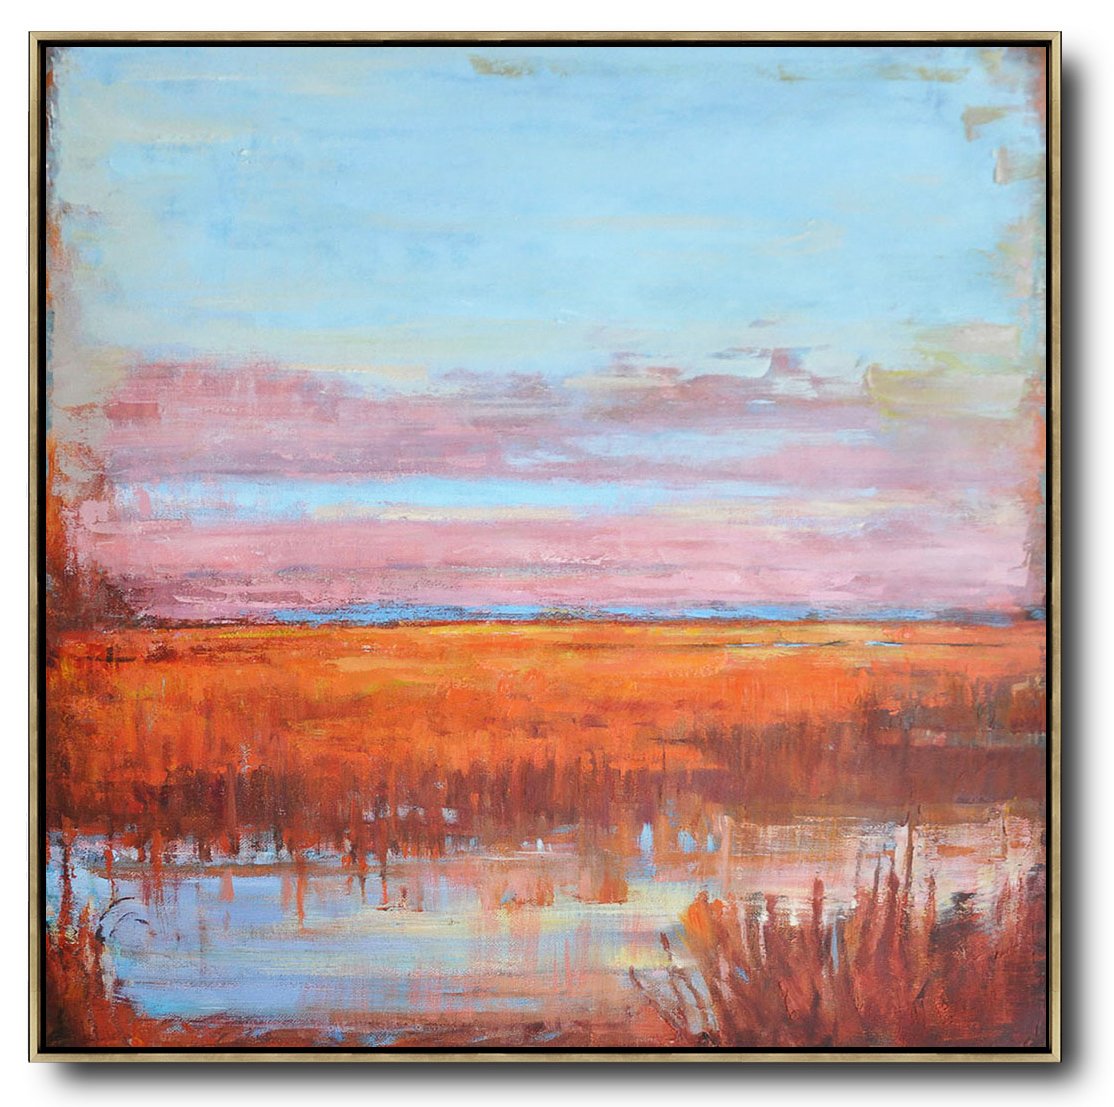 Large Abstract Art,Abstract Landscape Oil Painting,Contemporary Art Canvas Painting,Blue,Pink,Orange,Red.etc